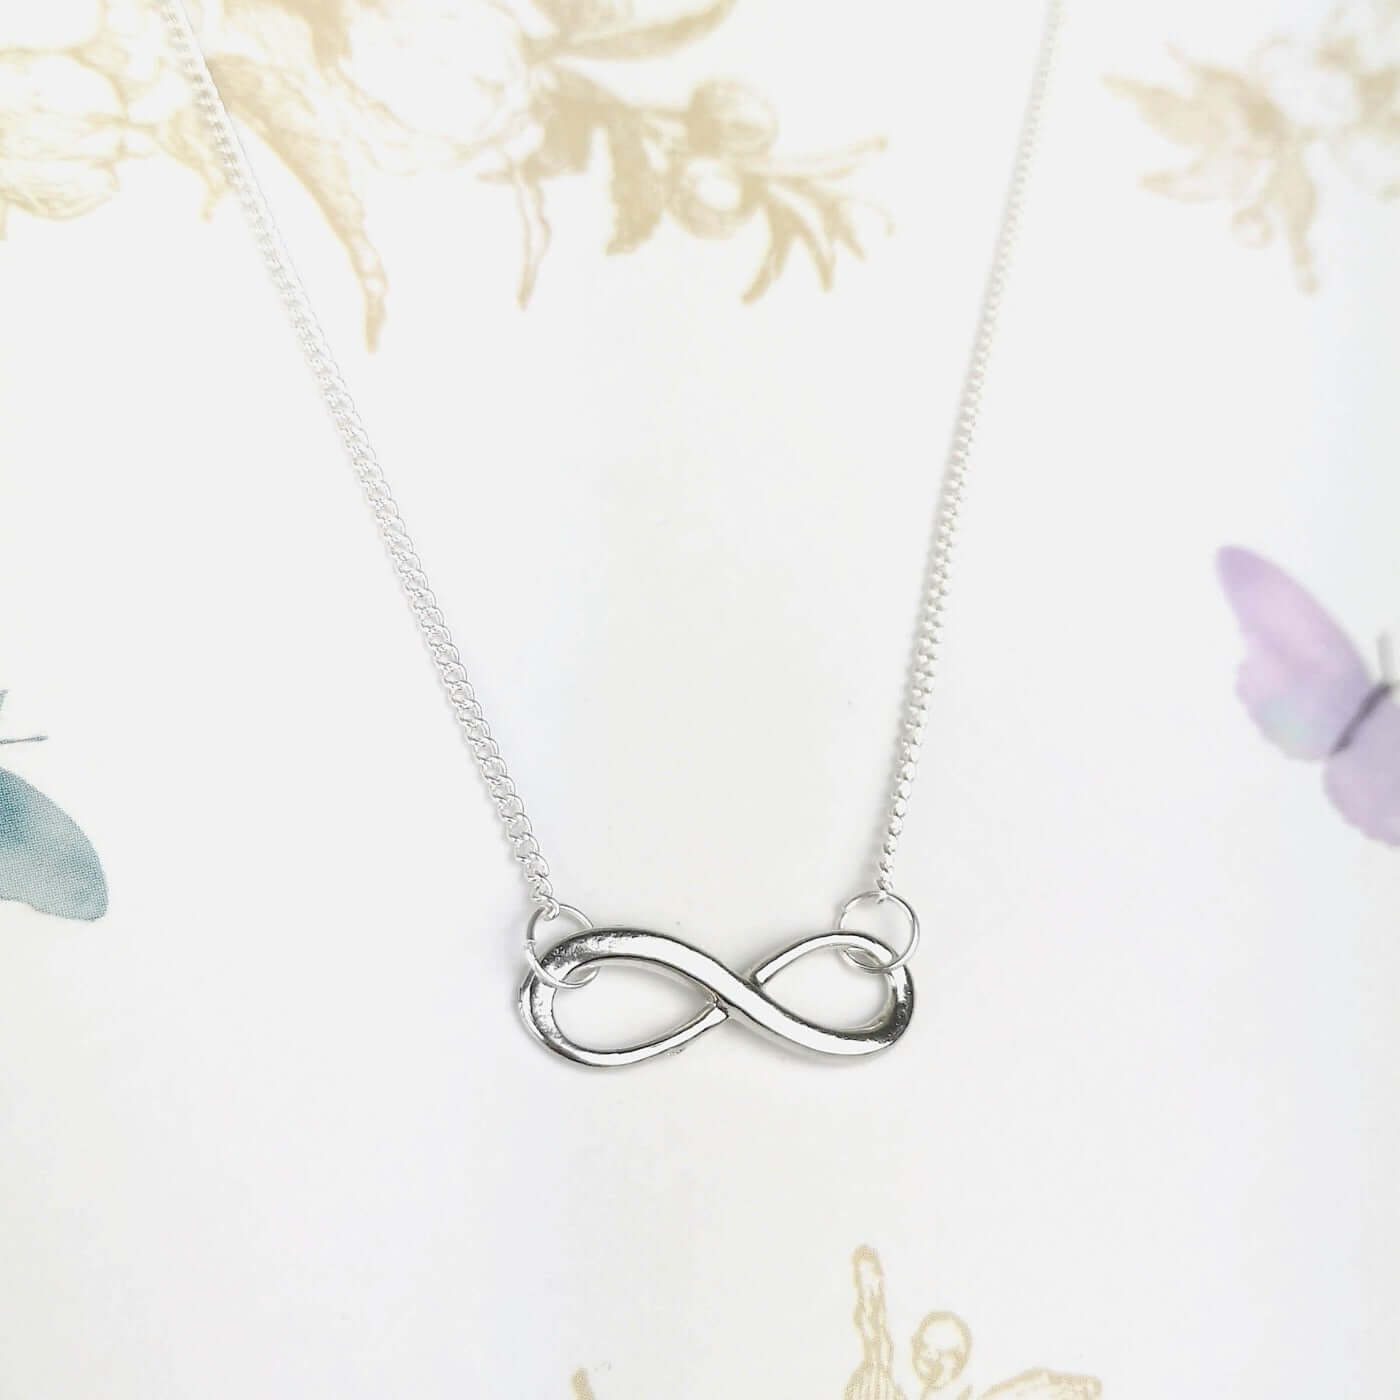 Infinity Symbol in a sterling silver chain